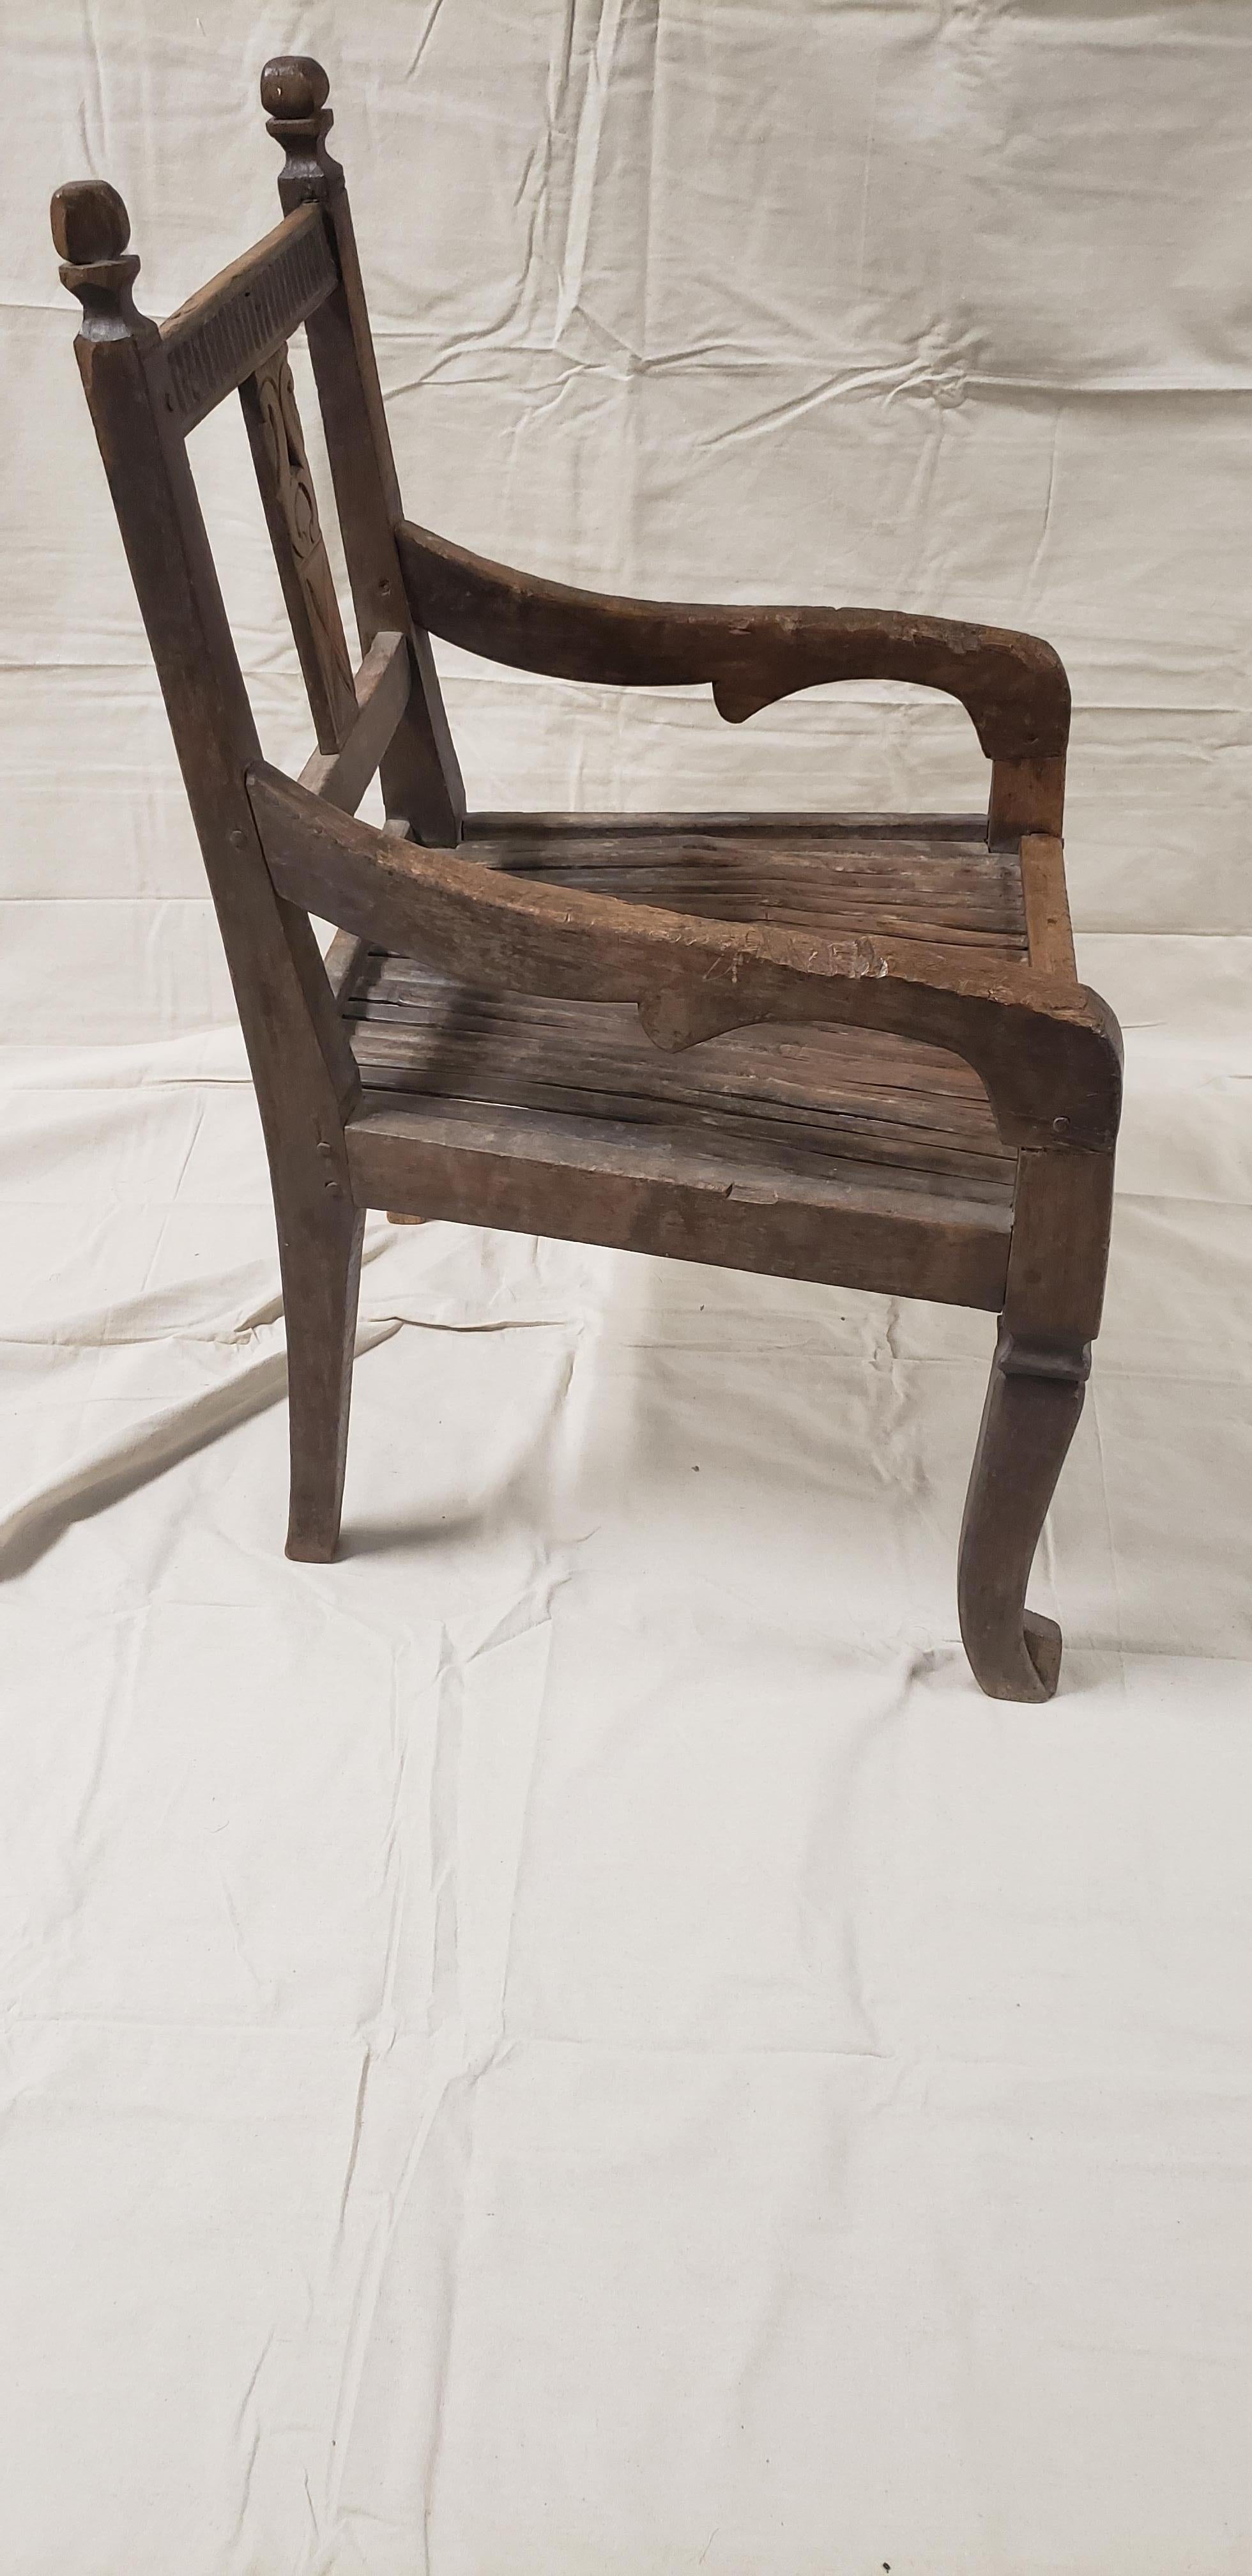 Carved 19th Century Balinese Throne Chair with Cane Seat